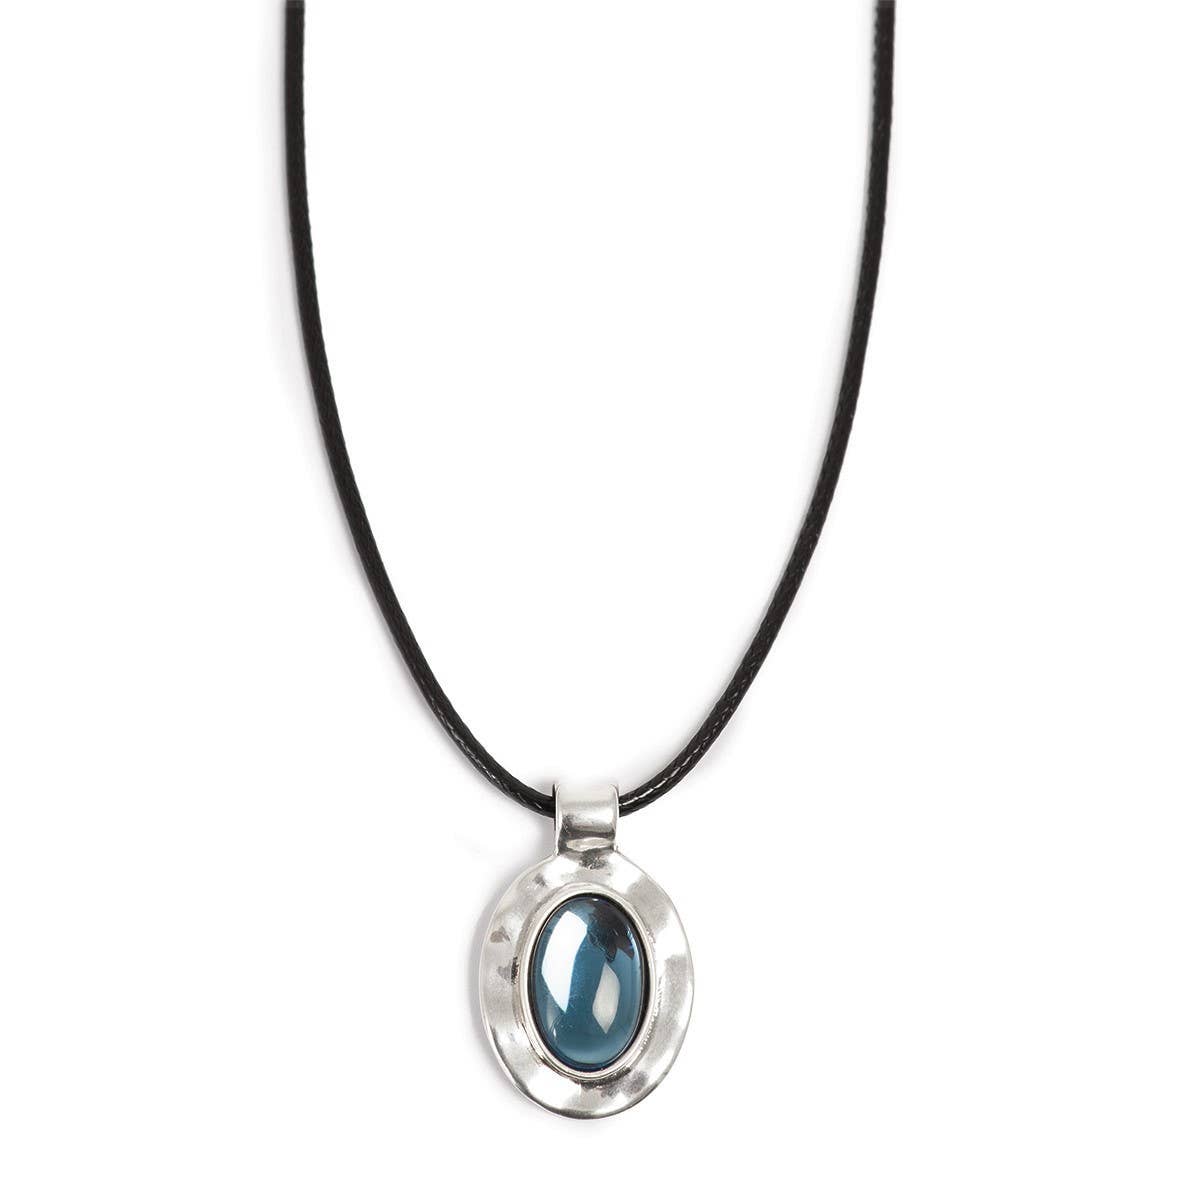 Jewelry: Silver Deep Blue Glass Necklace with Black Cord